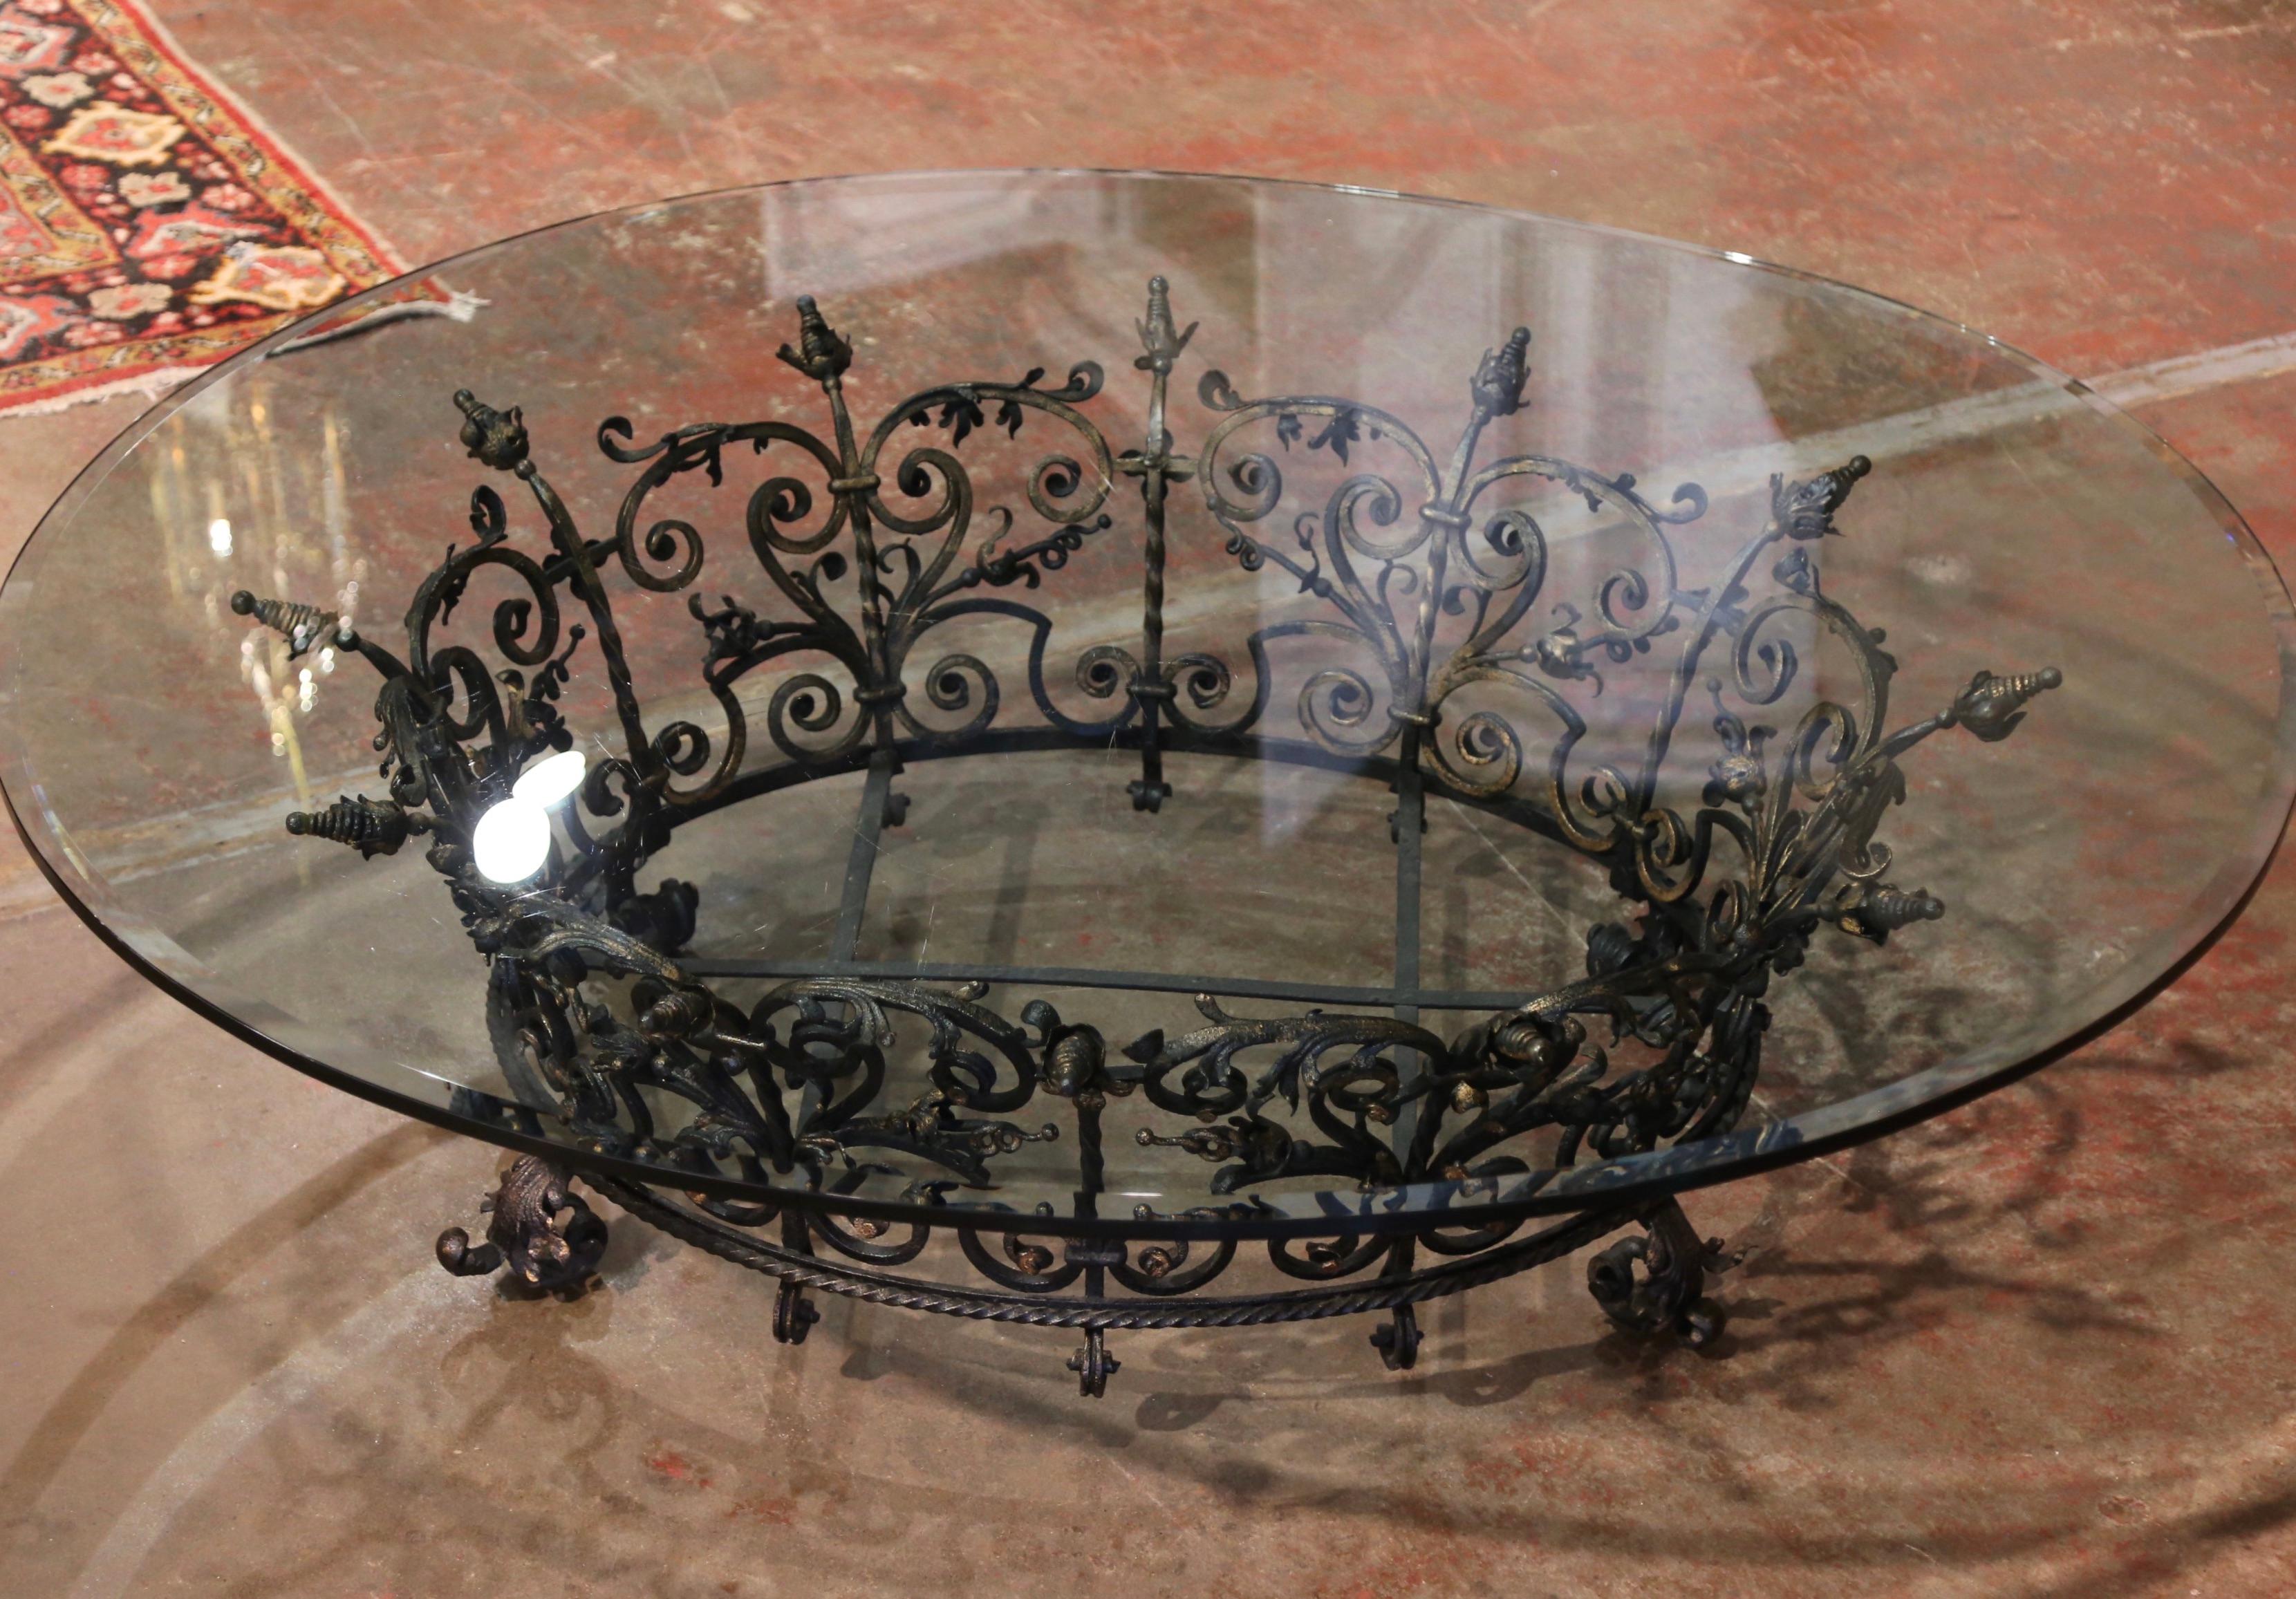 black wrought iron coffee table with glass top